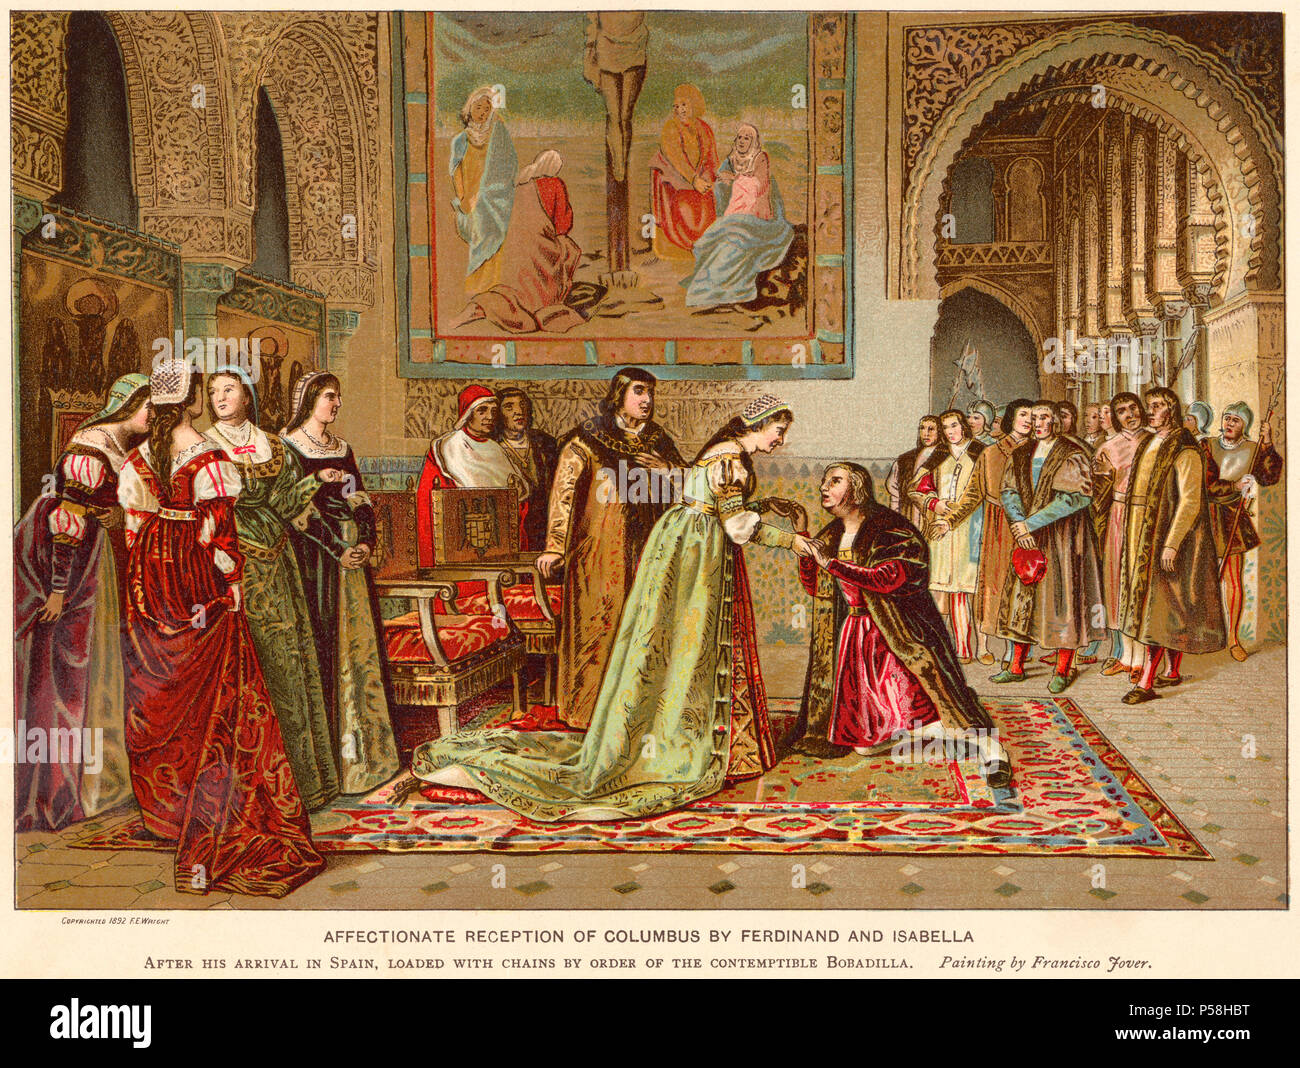 Affectionate Reception of Columbus by Ferdinand and Isabella after his Arrival in Spain, Loaded with Chains by Order of theContemptible Bobadilla, Chromolithograph from a Painting by Francisco Jover, 1892 Stock Photo